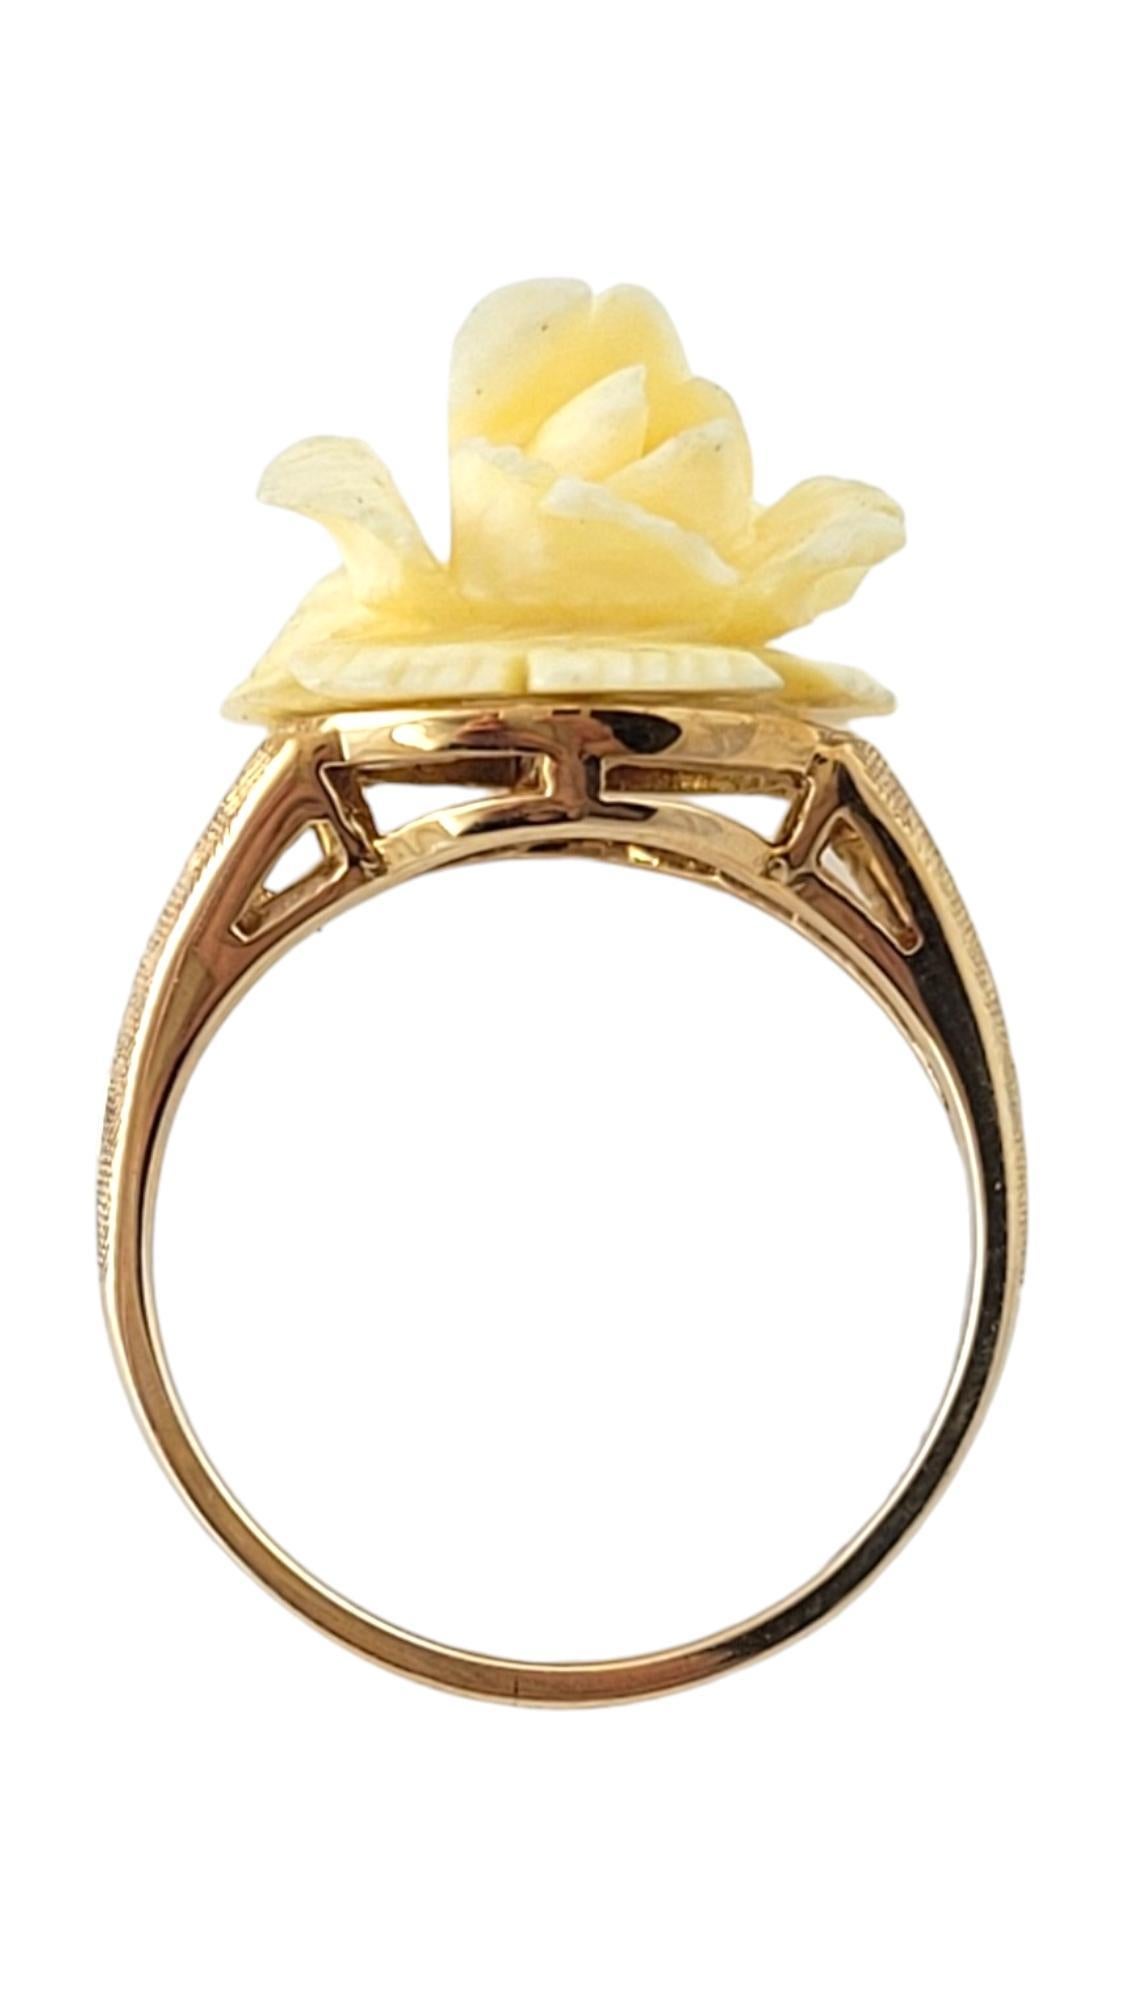 Women's Vintage 10K Yellow Gold White Rose Ring Size 5.25 #16933 For Sale